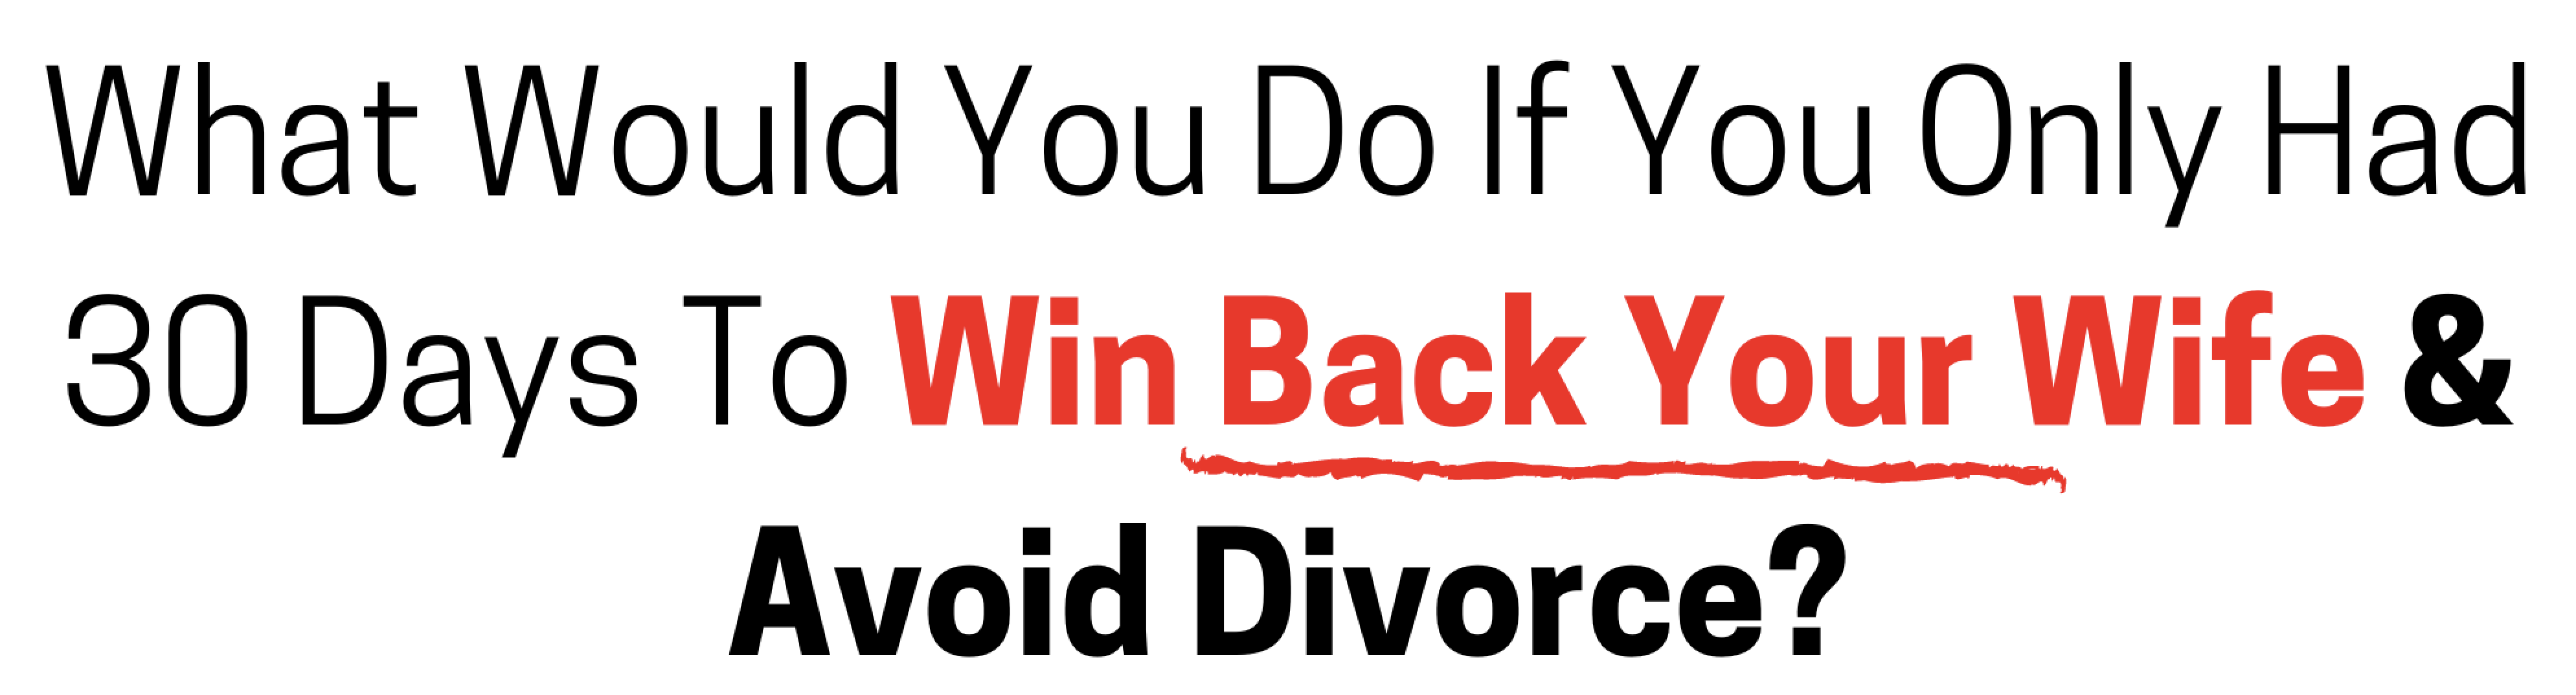 win back your wife